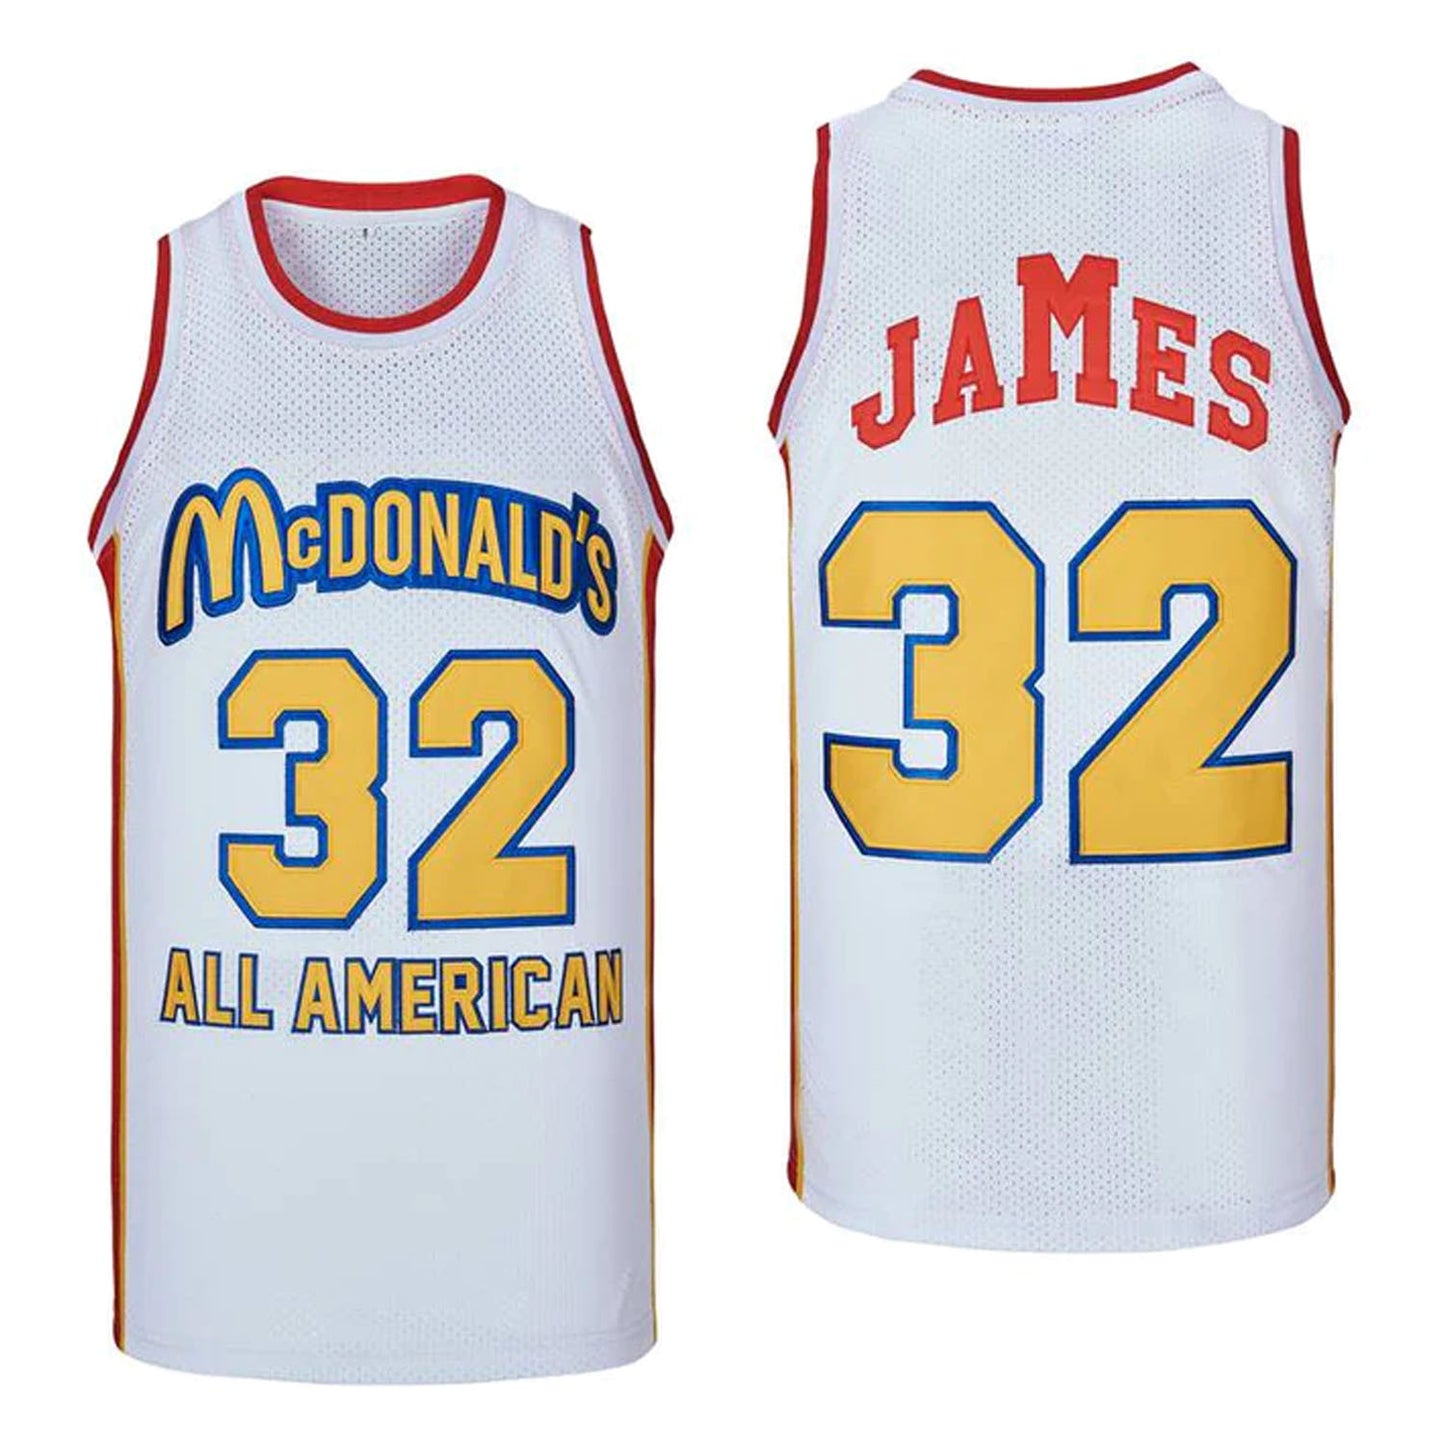 LeBron James All-American 32 Jersey